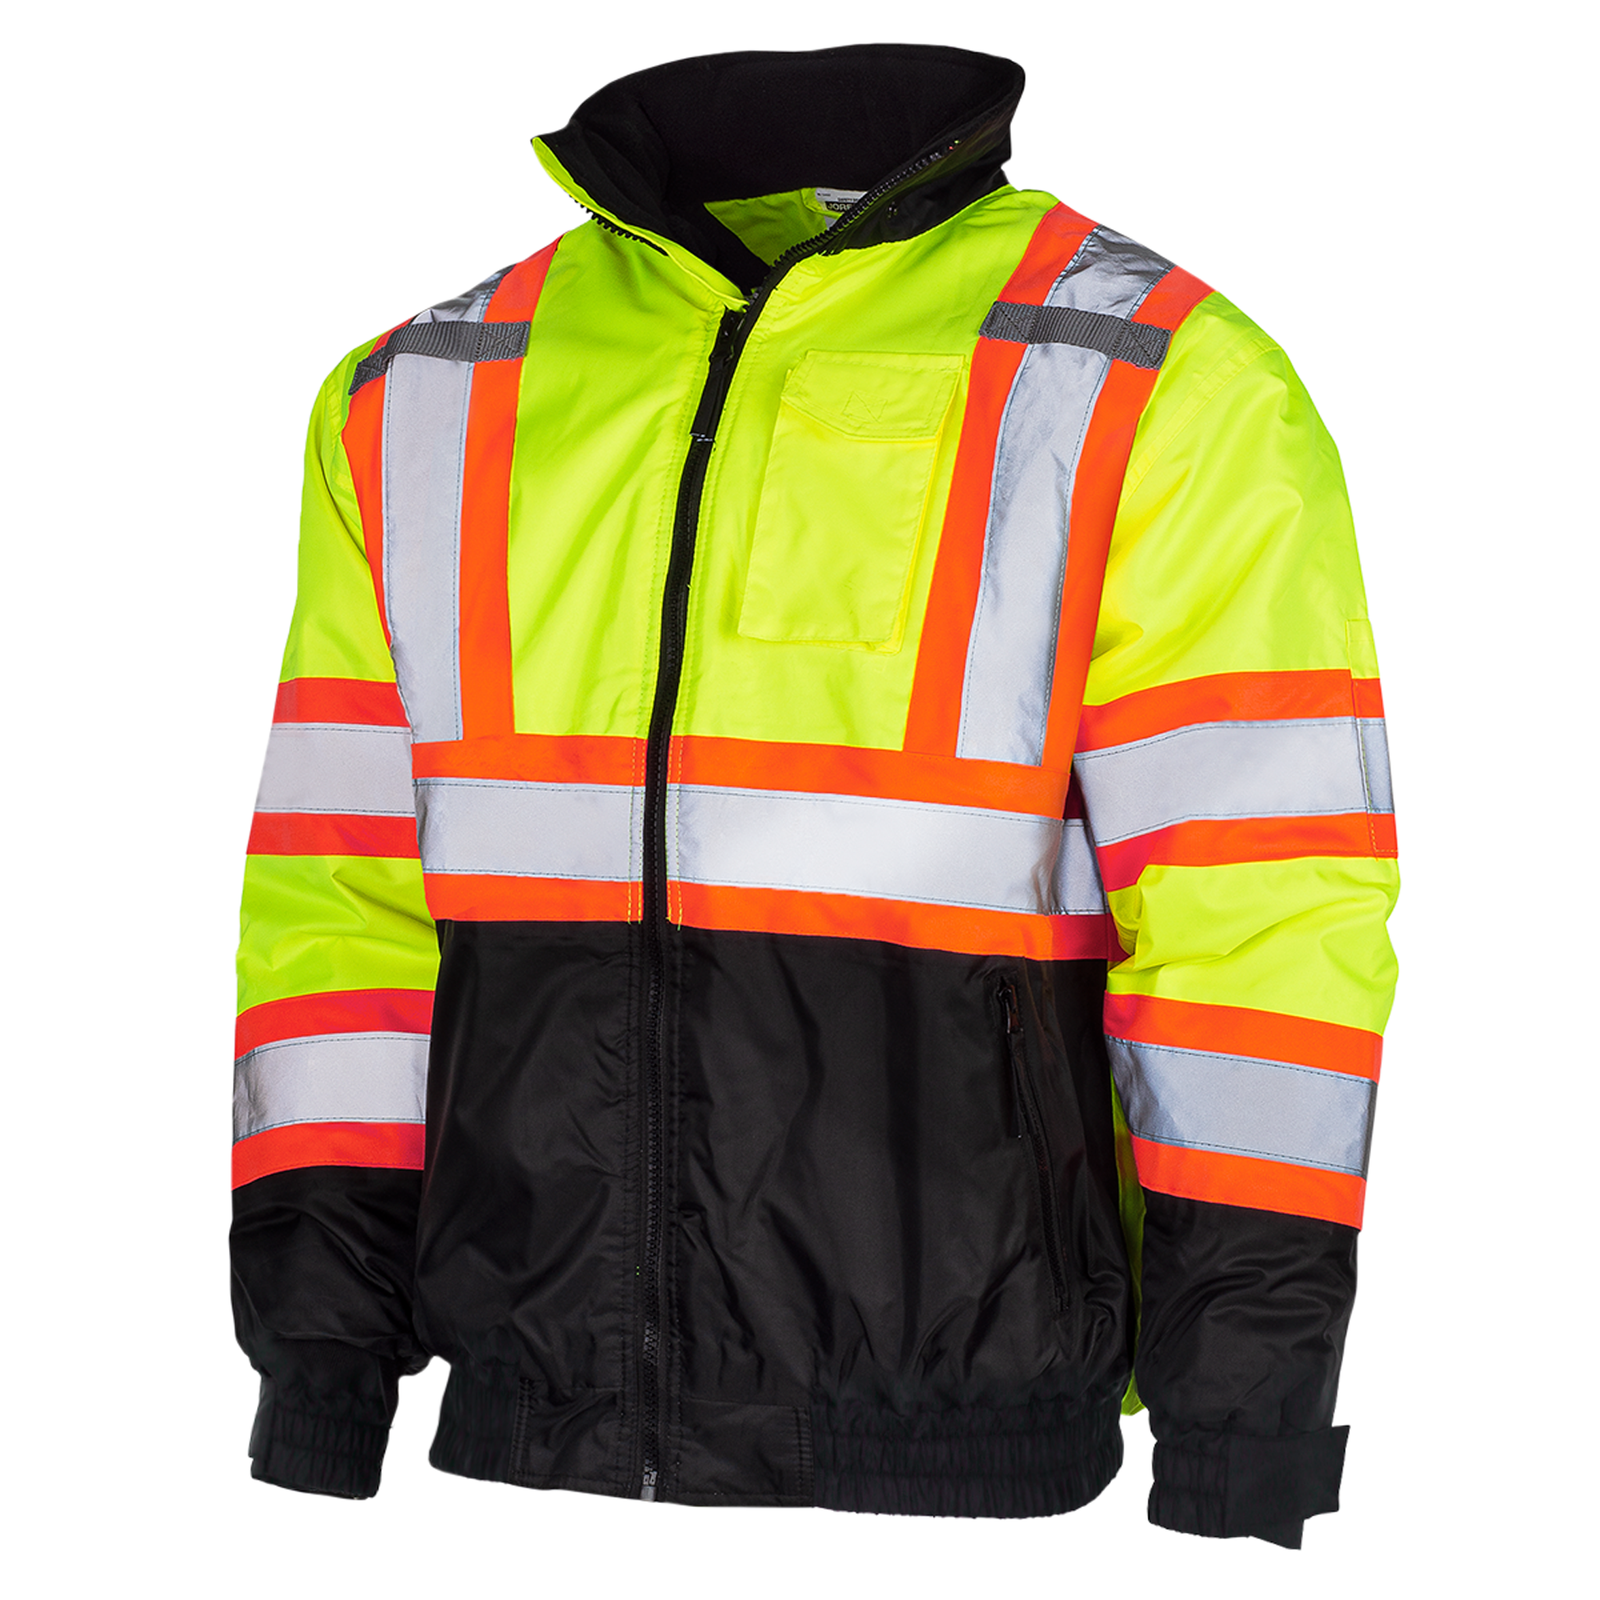 Diagonal view of the JORESTECH Hi-vis two tone Lime and Back safety bomber jacket with reflective stripes and black bottom